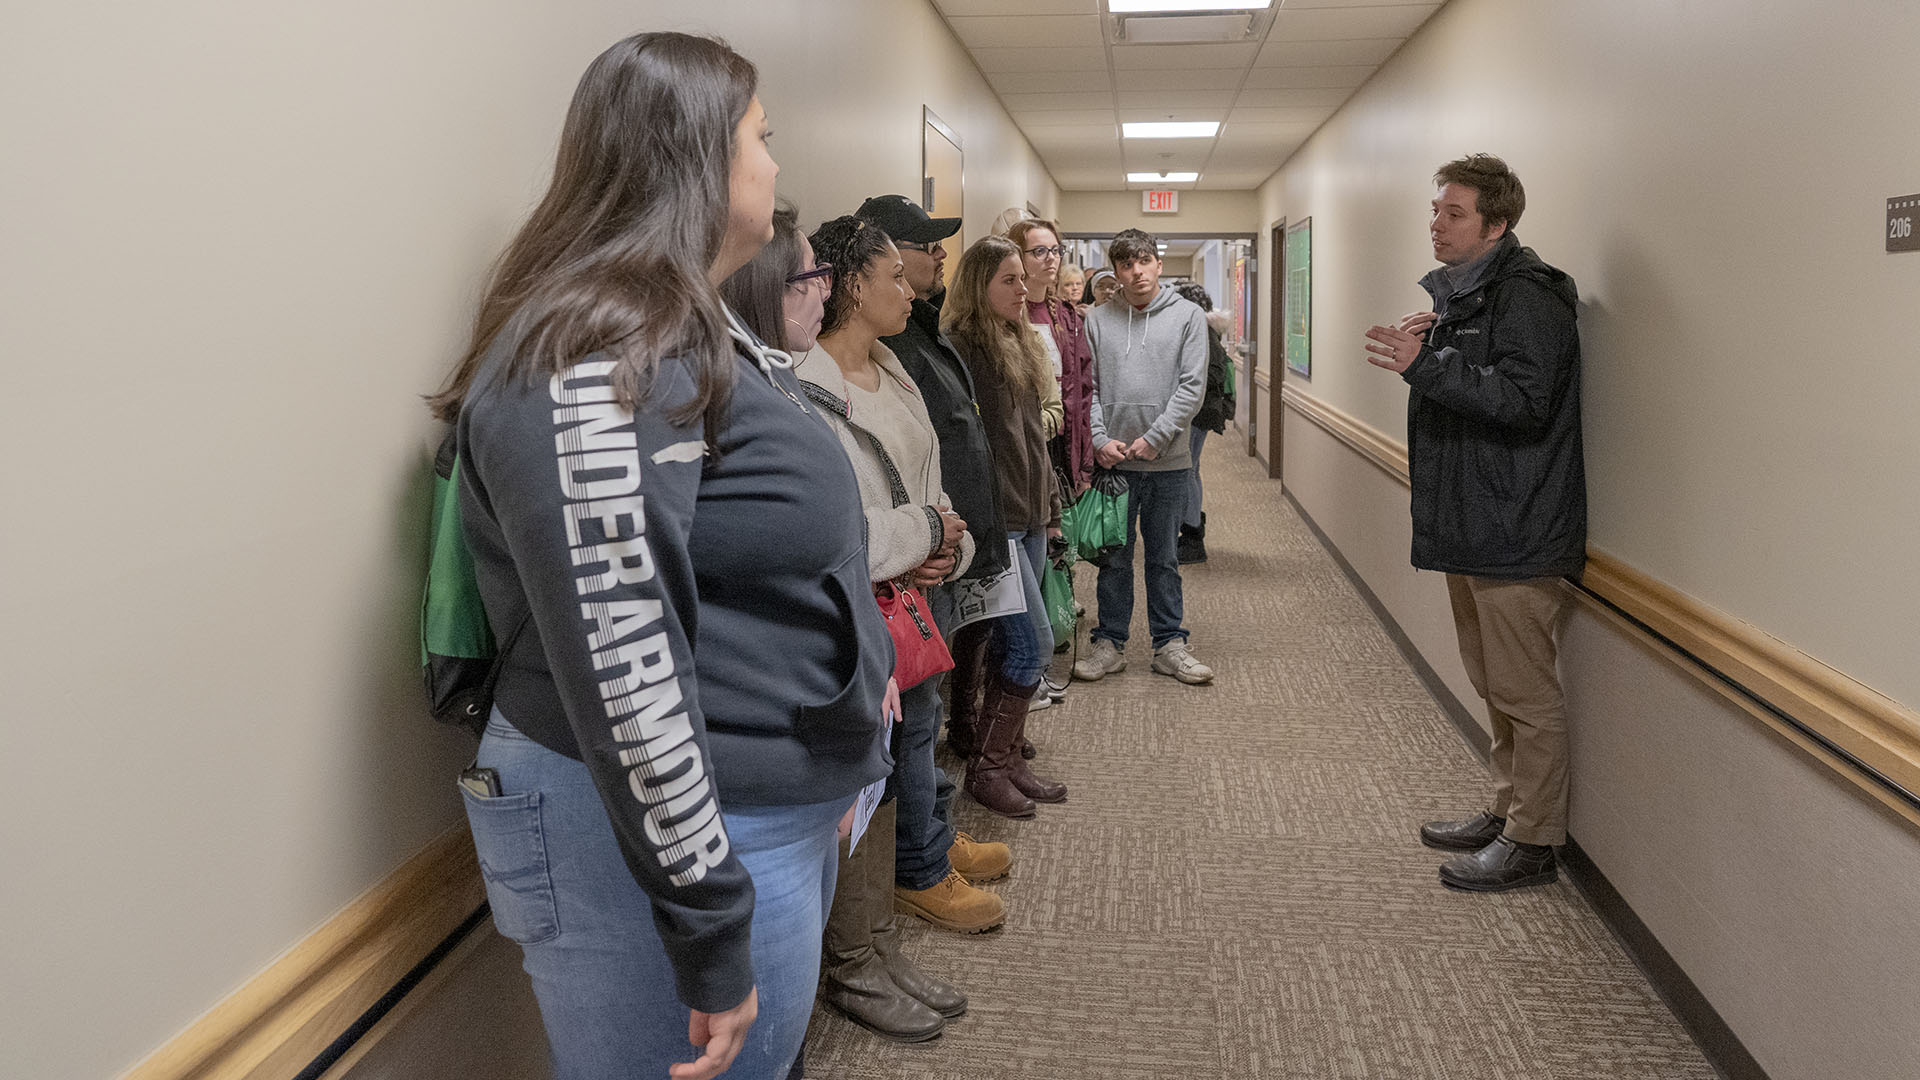 Students tour the residence halls